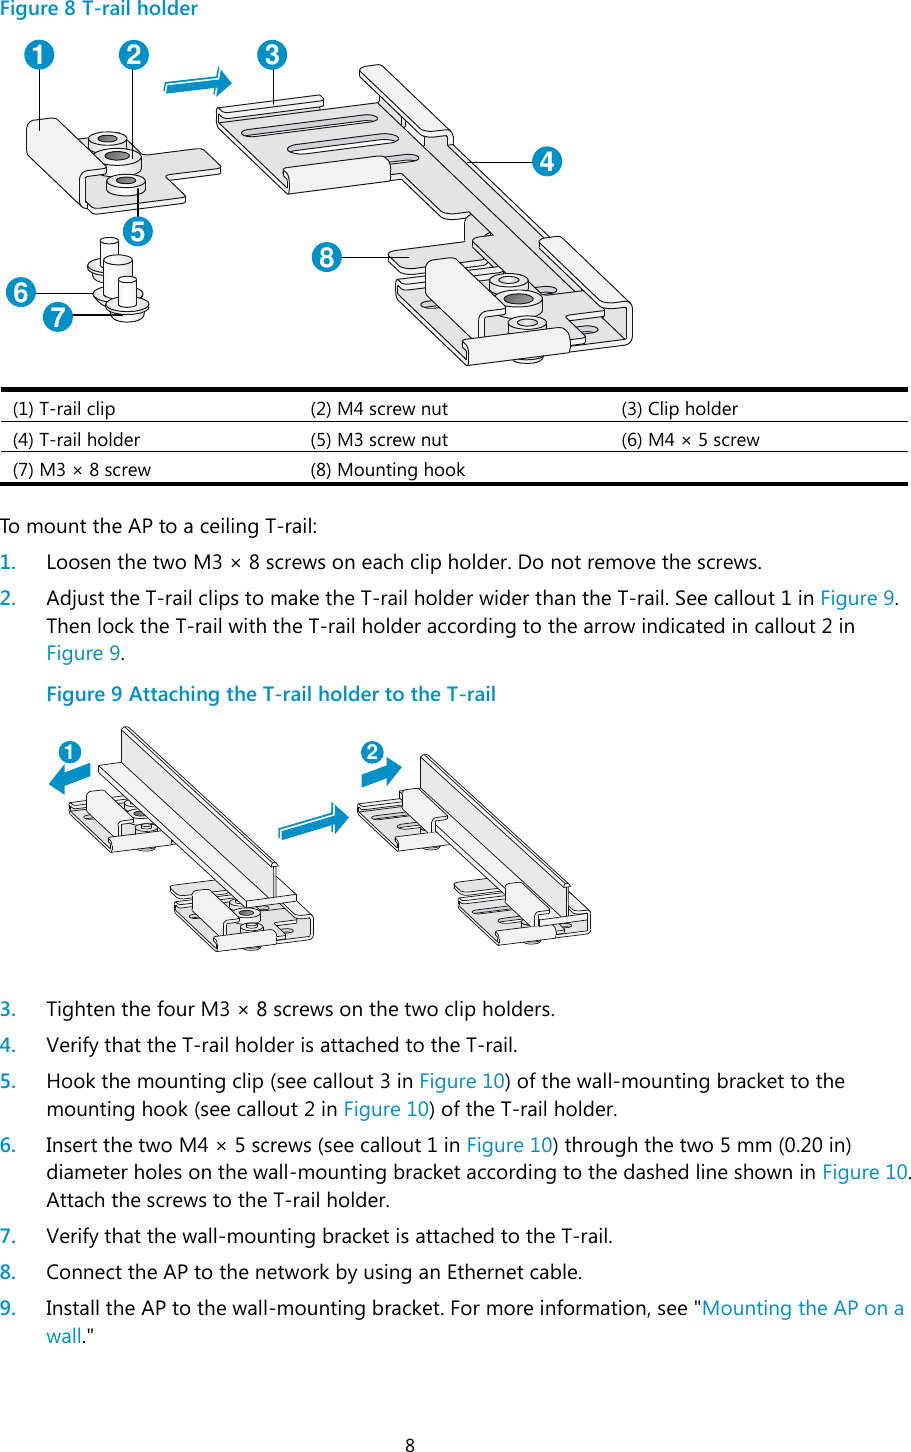  8 Figure 8 T-rail holder  (1) T-rail clip (2) M4 screw nut (3) Clip holder (4) T-rail holder (5) M3 screw nut (6) M4 ×  5 screw (7) M3 ×  8 screw (8) Mounting hook   To mount the AP to a ceiling T-rail: 1. Loosen the two M3 ×  8 screws on each clip holder. Do not remove the screws. 2. Adjust the T-rail clips to make the T-rail holder wider than the T-rail. See callout 1 in Figure 9. Then lock the T-rail with the T-rail holder according to the arrow indicated in callout 2 in Figure 9. Figure 9 Attaching the T-rail holder to the T-rail   3. Tighten the four M3 ×  8 screws on the two clip holders. 4. Verify that the T-rail holder is attached to the T-rail. 5. Hook the mounting clip (see callout 3 in Figure 10) of the wall-mounting bracket to the mounting hook (see callout 2 in Figure 10) of the T-rail holder. 6. Insert the two M4 ×  5 screws (see callout 1 in Figure 10) through the two 5 mm (0.20 in) diameter holes on the wall-mounting bracket according to the dashed line shown in Figure 10. Attach the screws to the T-rail holder.  7. Verify that the wall-mounting bracket is attached to the T-rail. 8. Connect the AP to the network by using an Ethernet cable. 9. Install the AP to the wall-mounting bracket. For more information, see &quot;Mounting the AP on a wall.&quot; 1 2 3456781 2